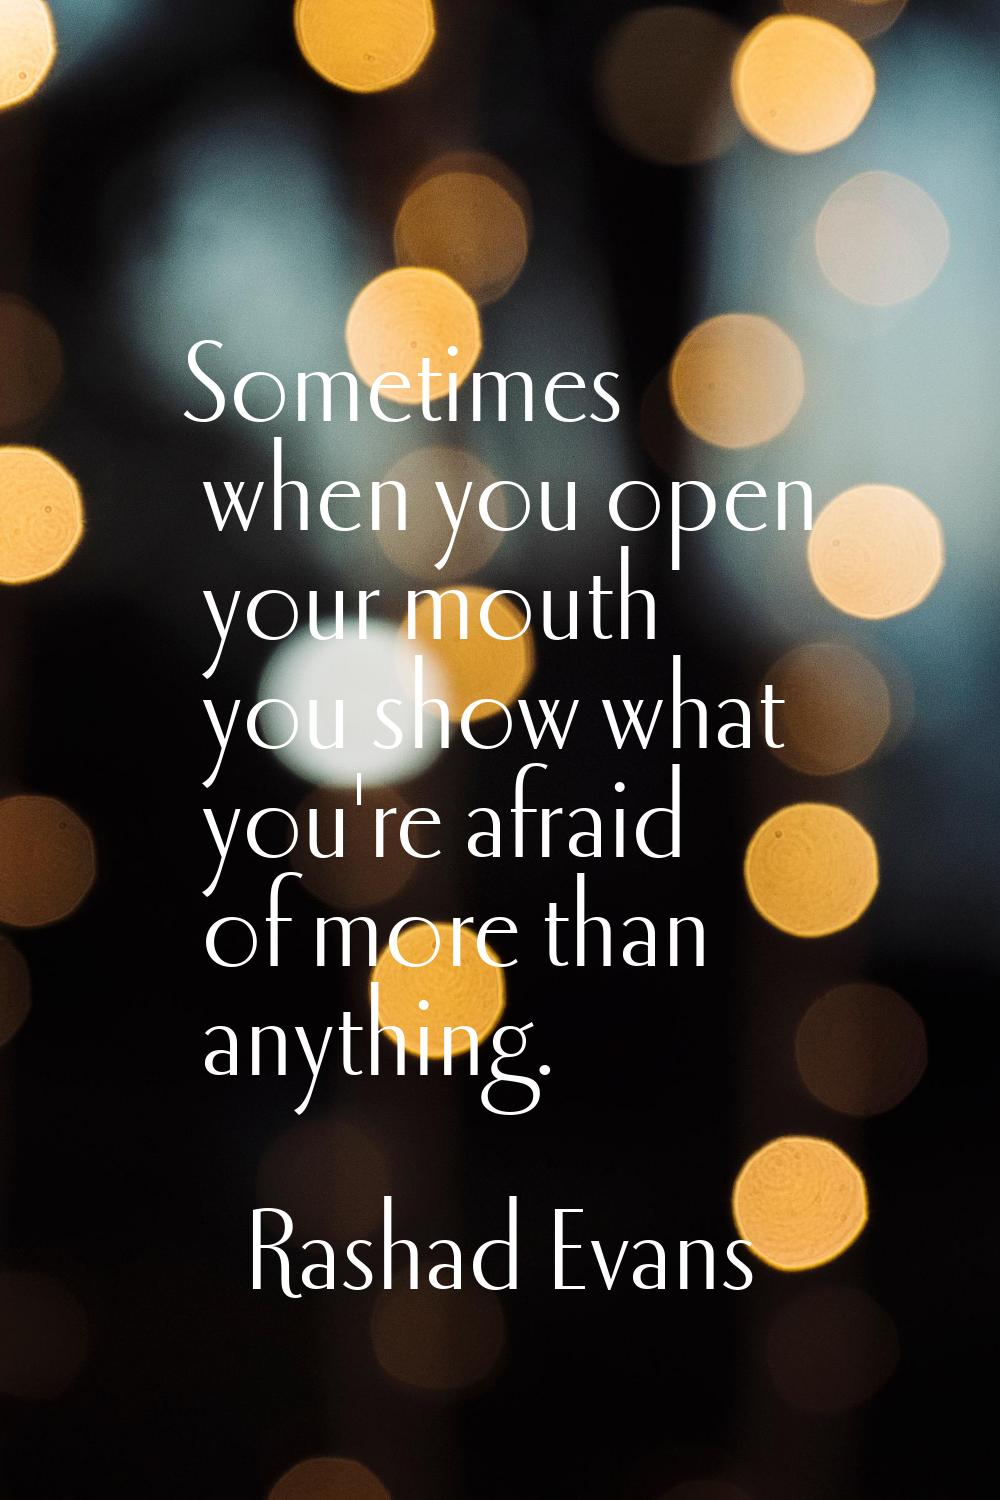 Sometimes when you open your mouth you show what you're afraid of more than anything.